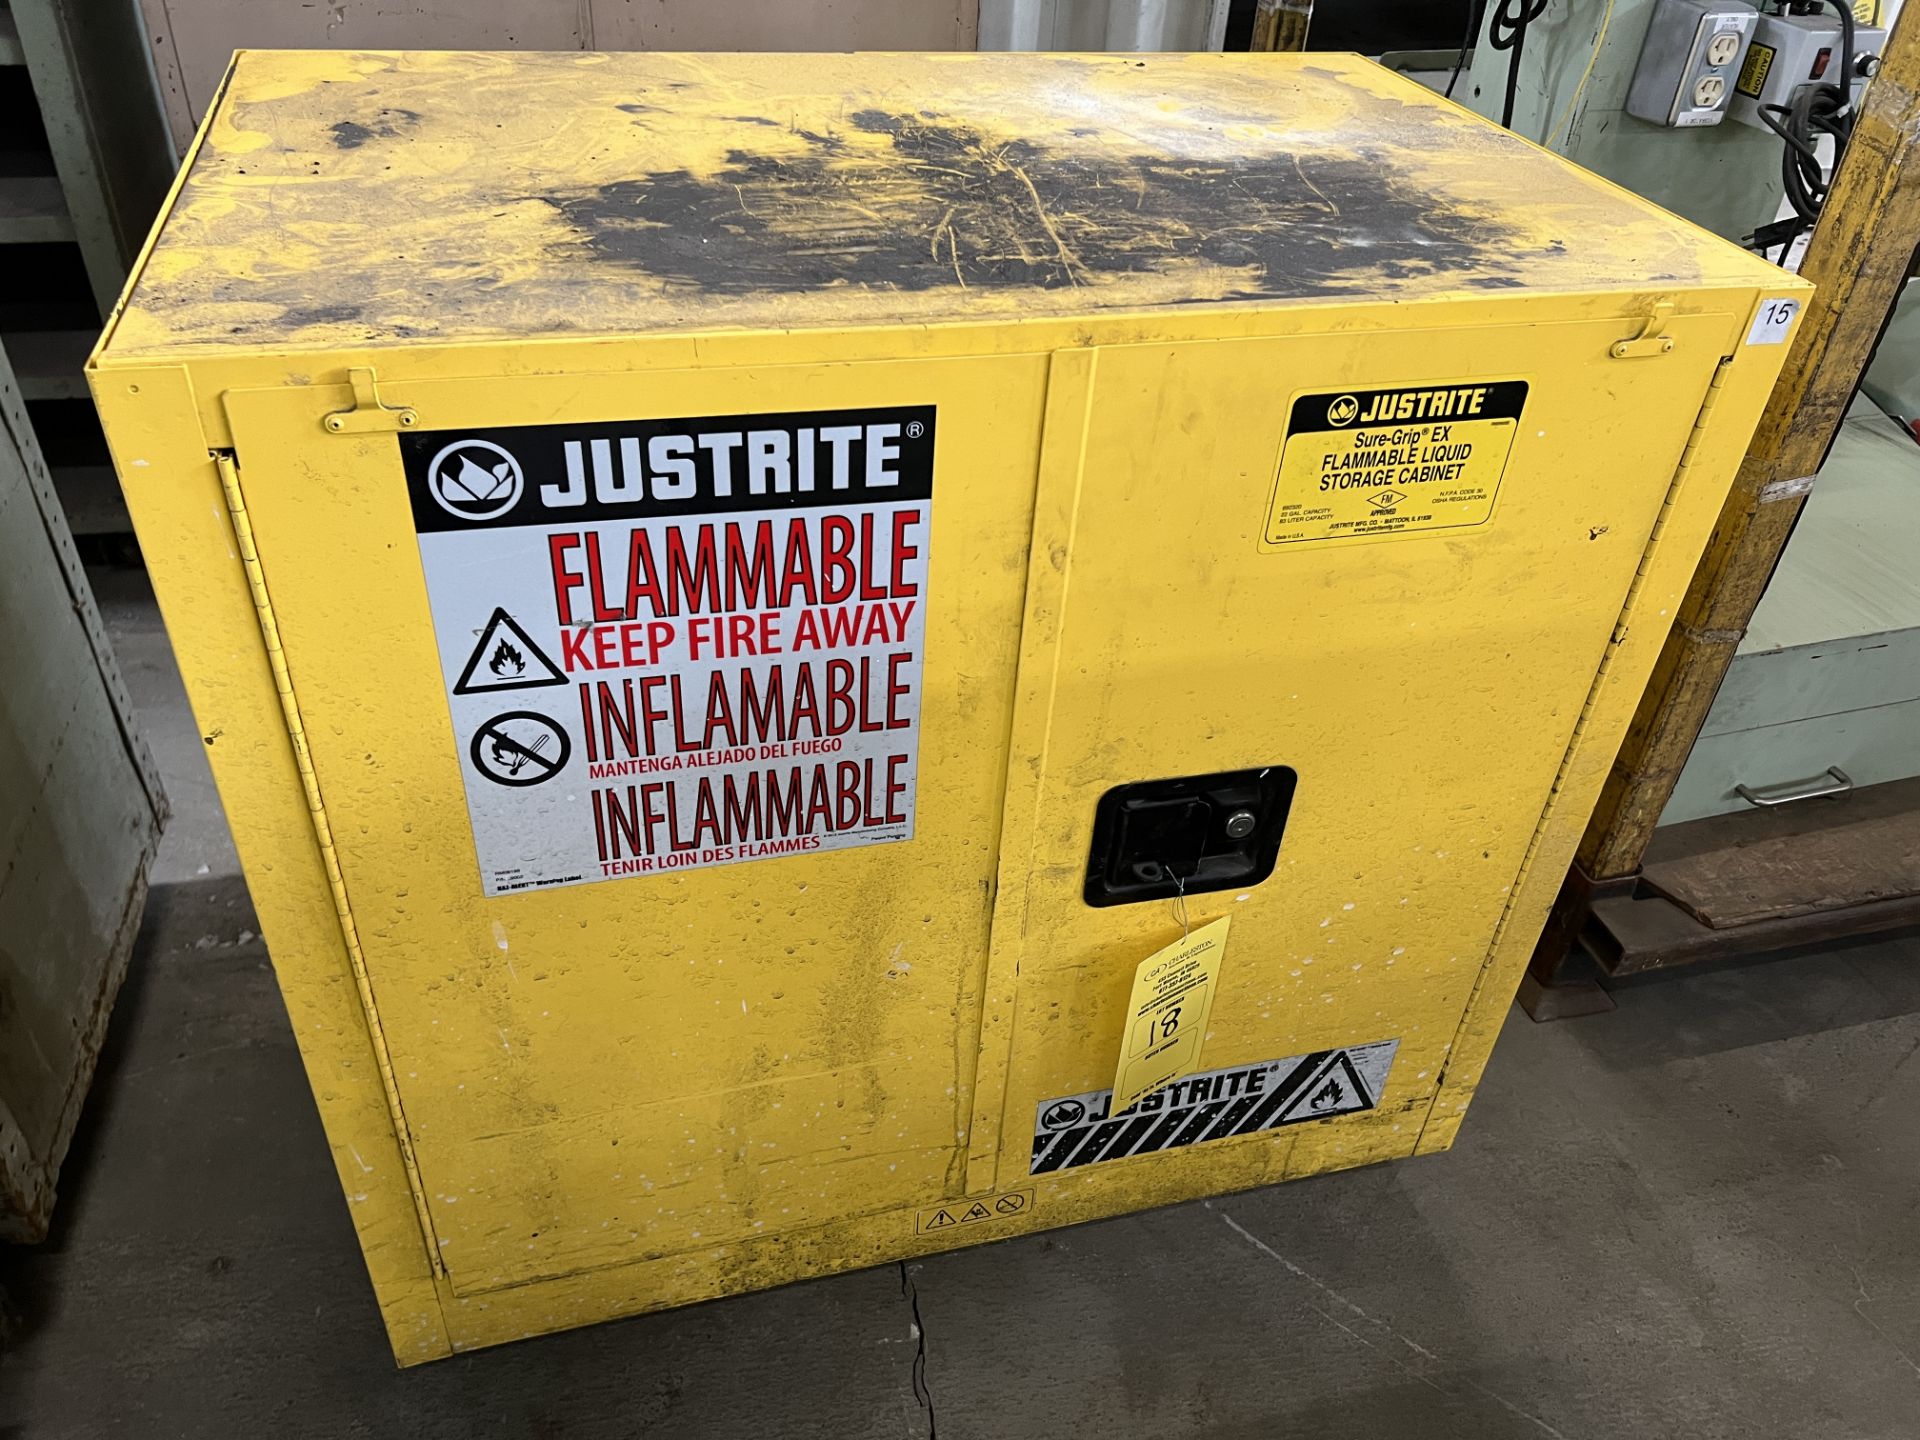 JUSTRITE FLAMMABLE STORAGE CABINET